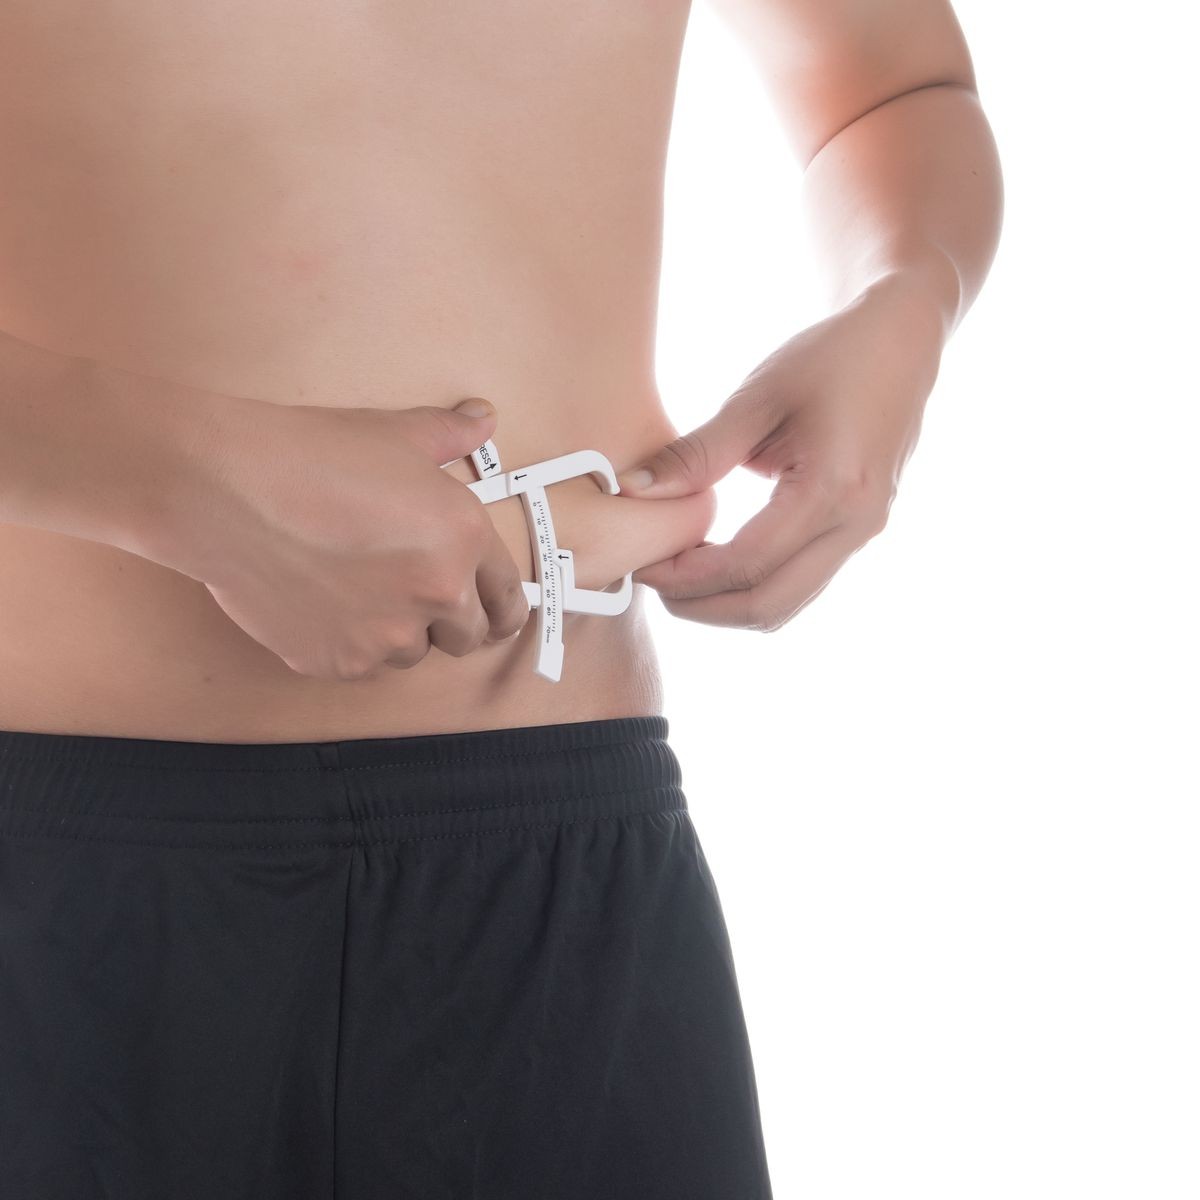 Man is measuring his body fat with calipers,healthy lifestyle and body care concept.